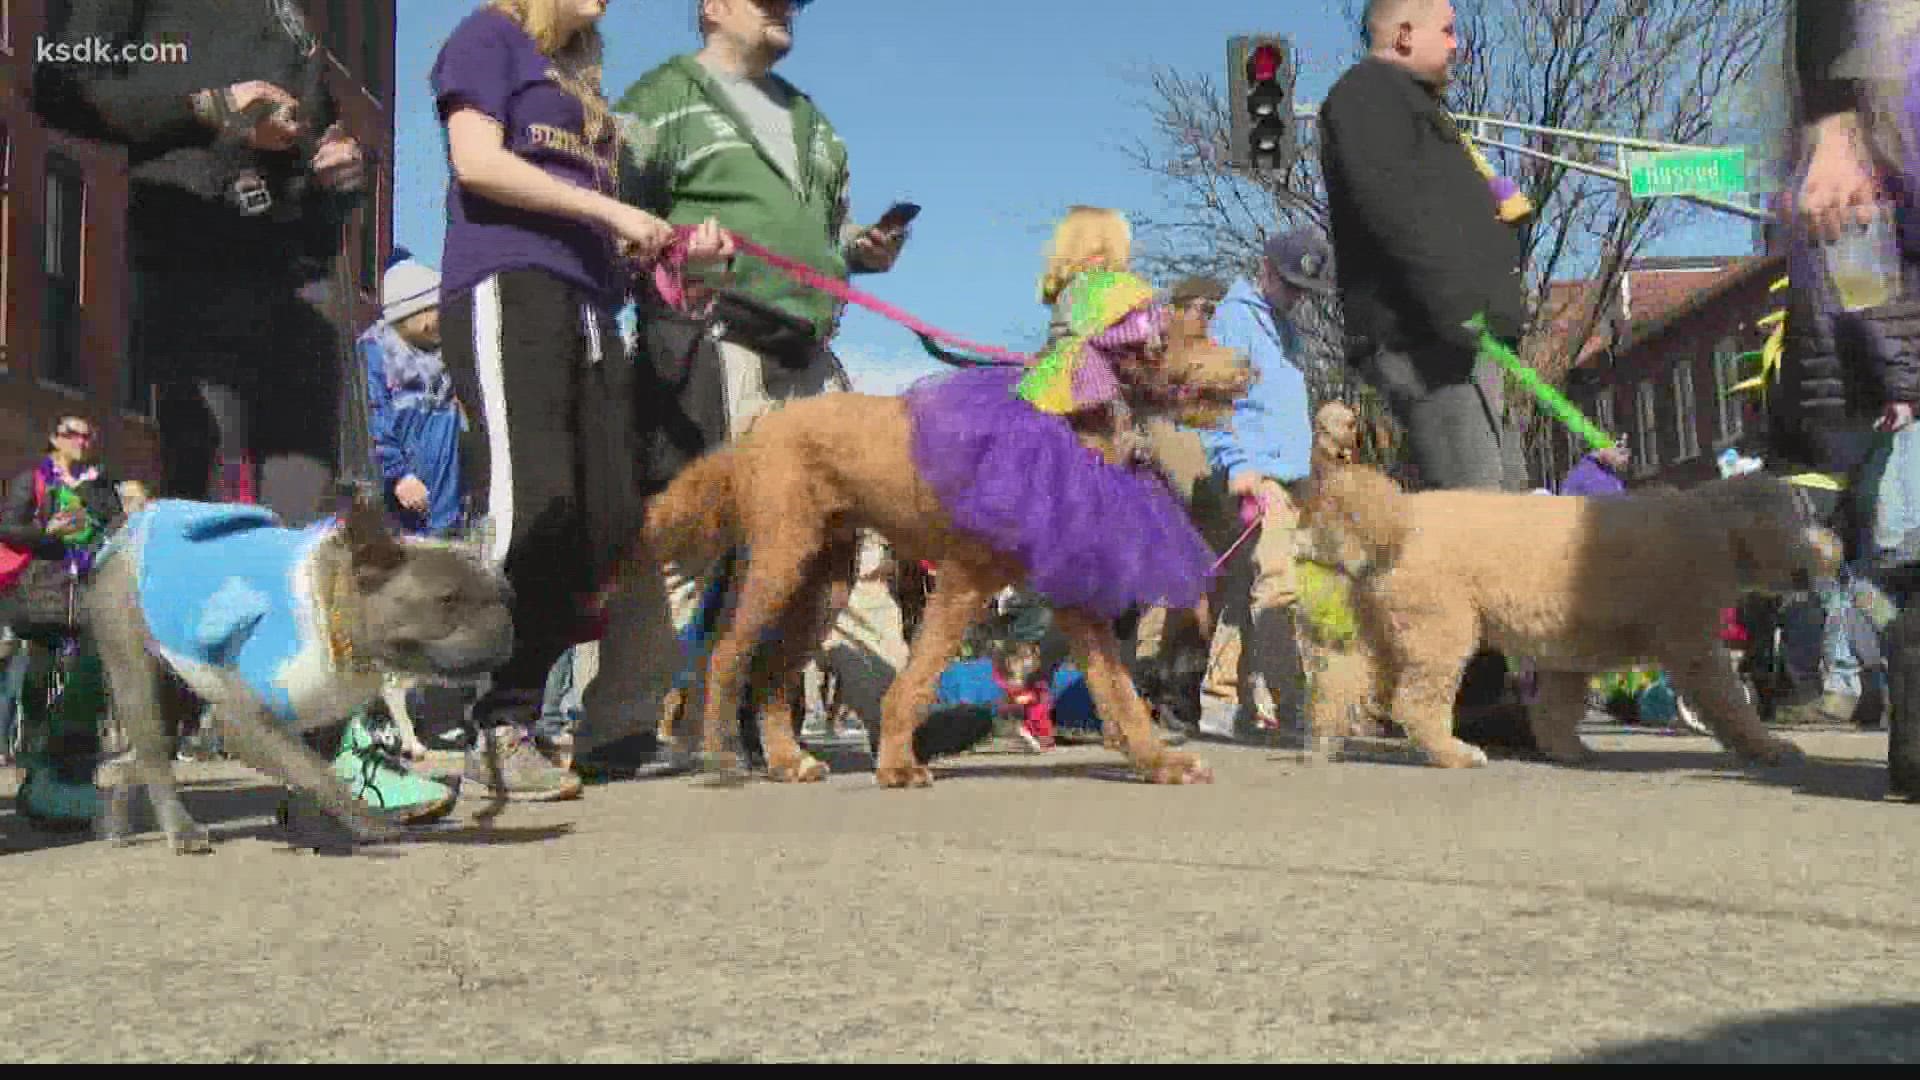 The parade is followed by the Wiener Dog Derby at 2 p.m. Record crowds are expected.